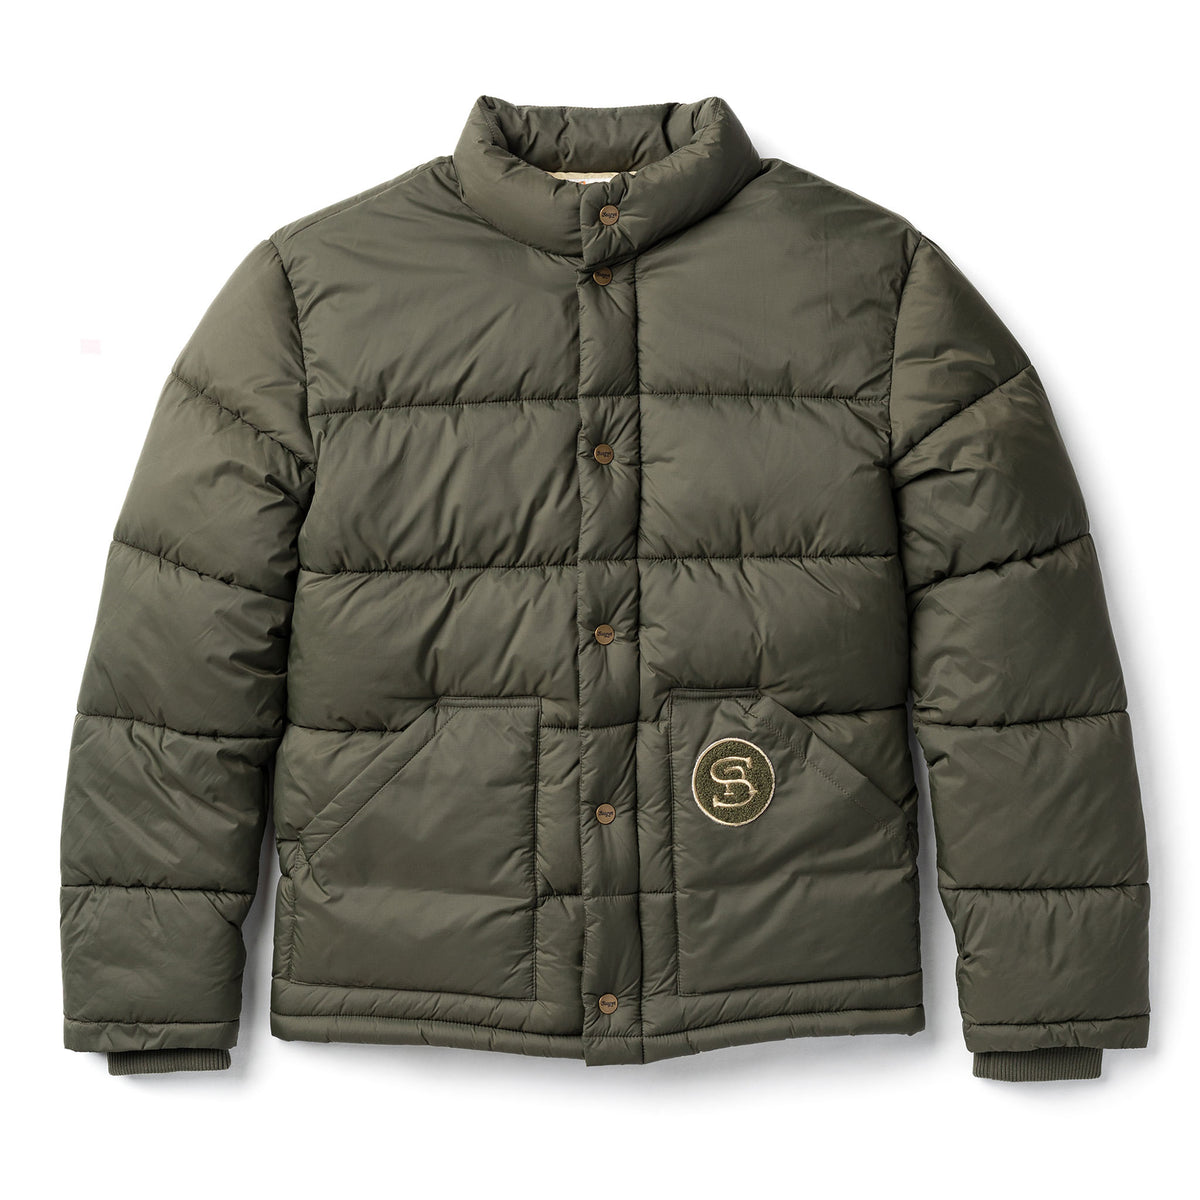 OUTERWEAR | Seager Co.